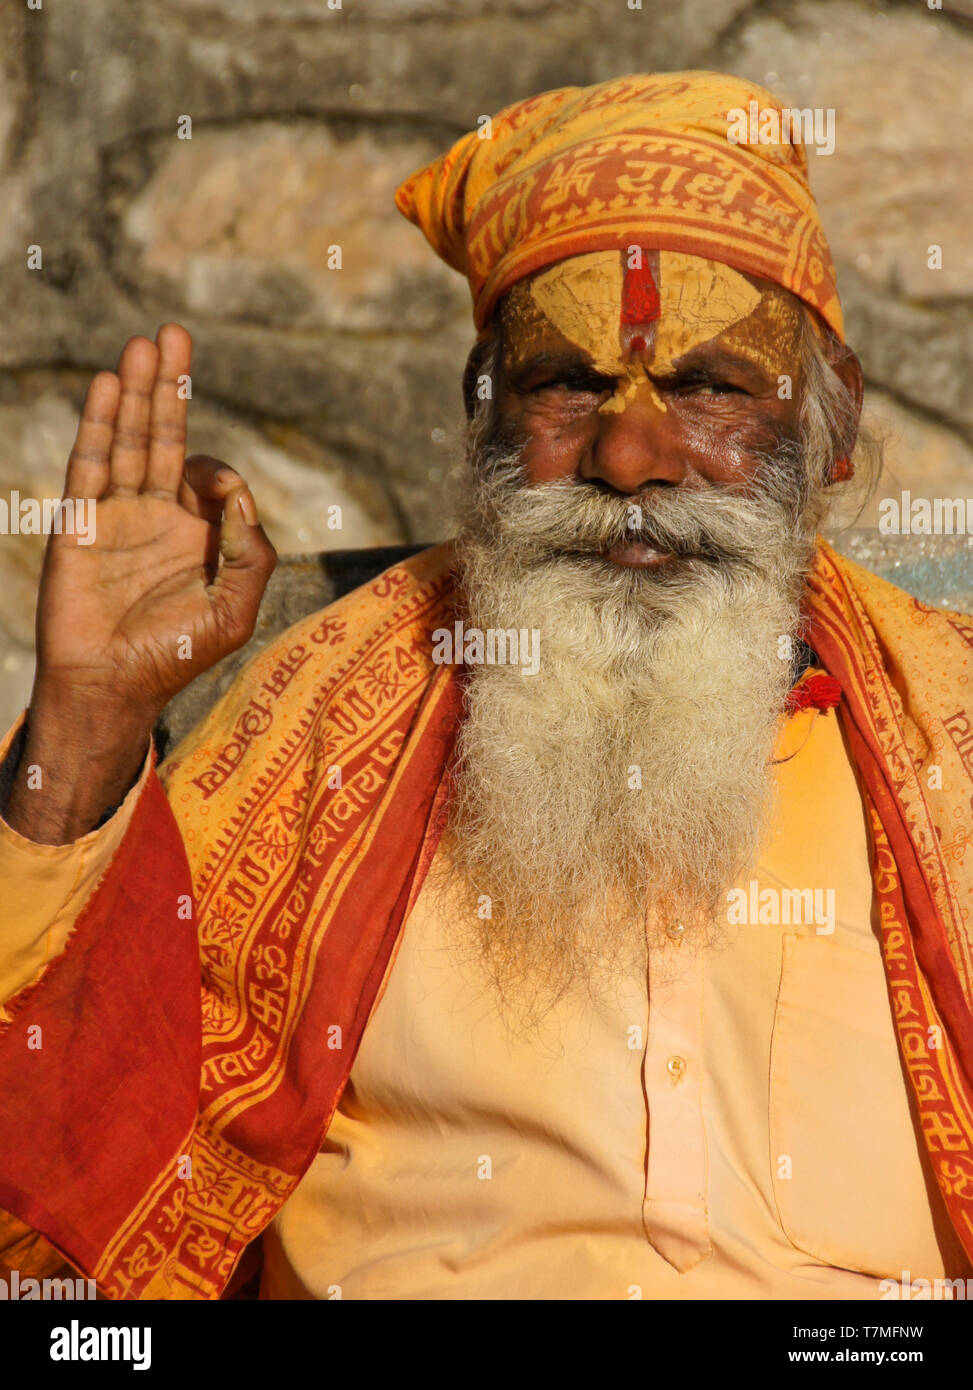 Portrait of a sadhu (holy man) with painted face, clad in orange robes, Pashupatinath Hindu temple, Kathmandu Valley, Nepal Stock Photo